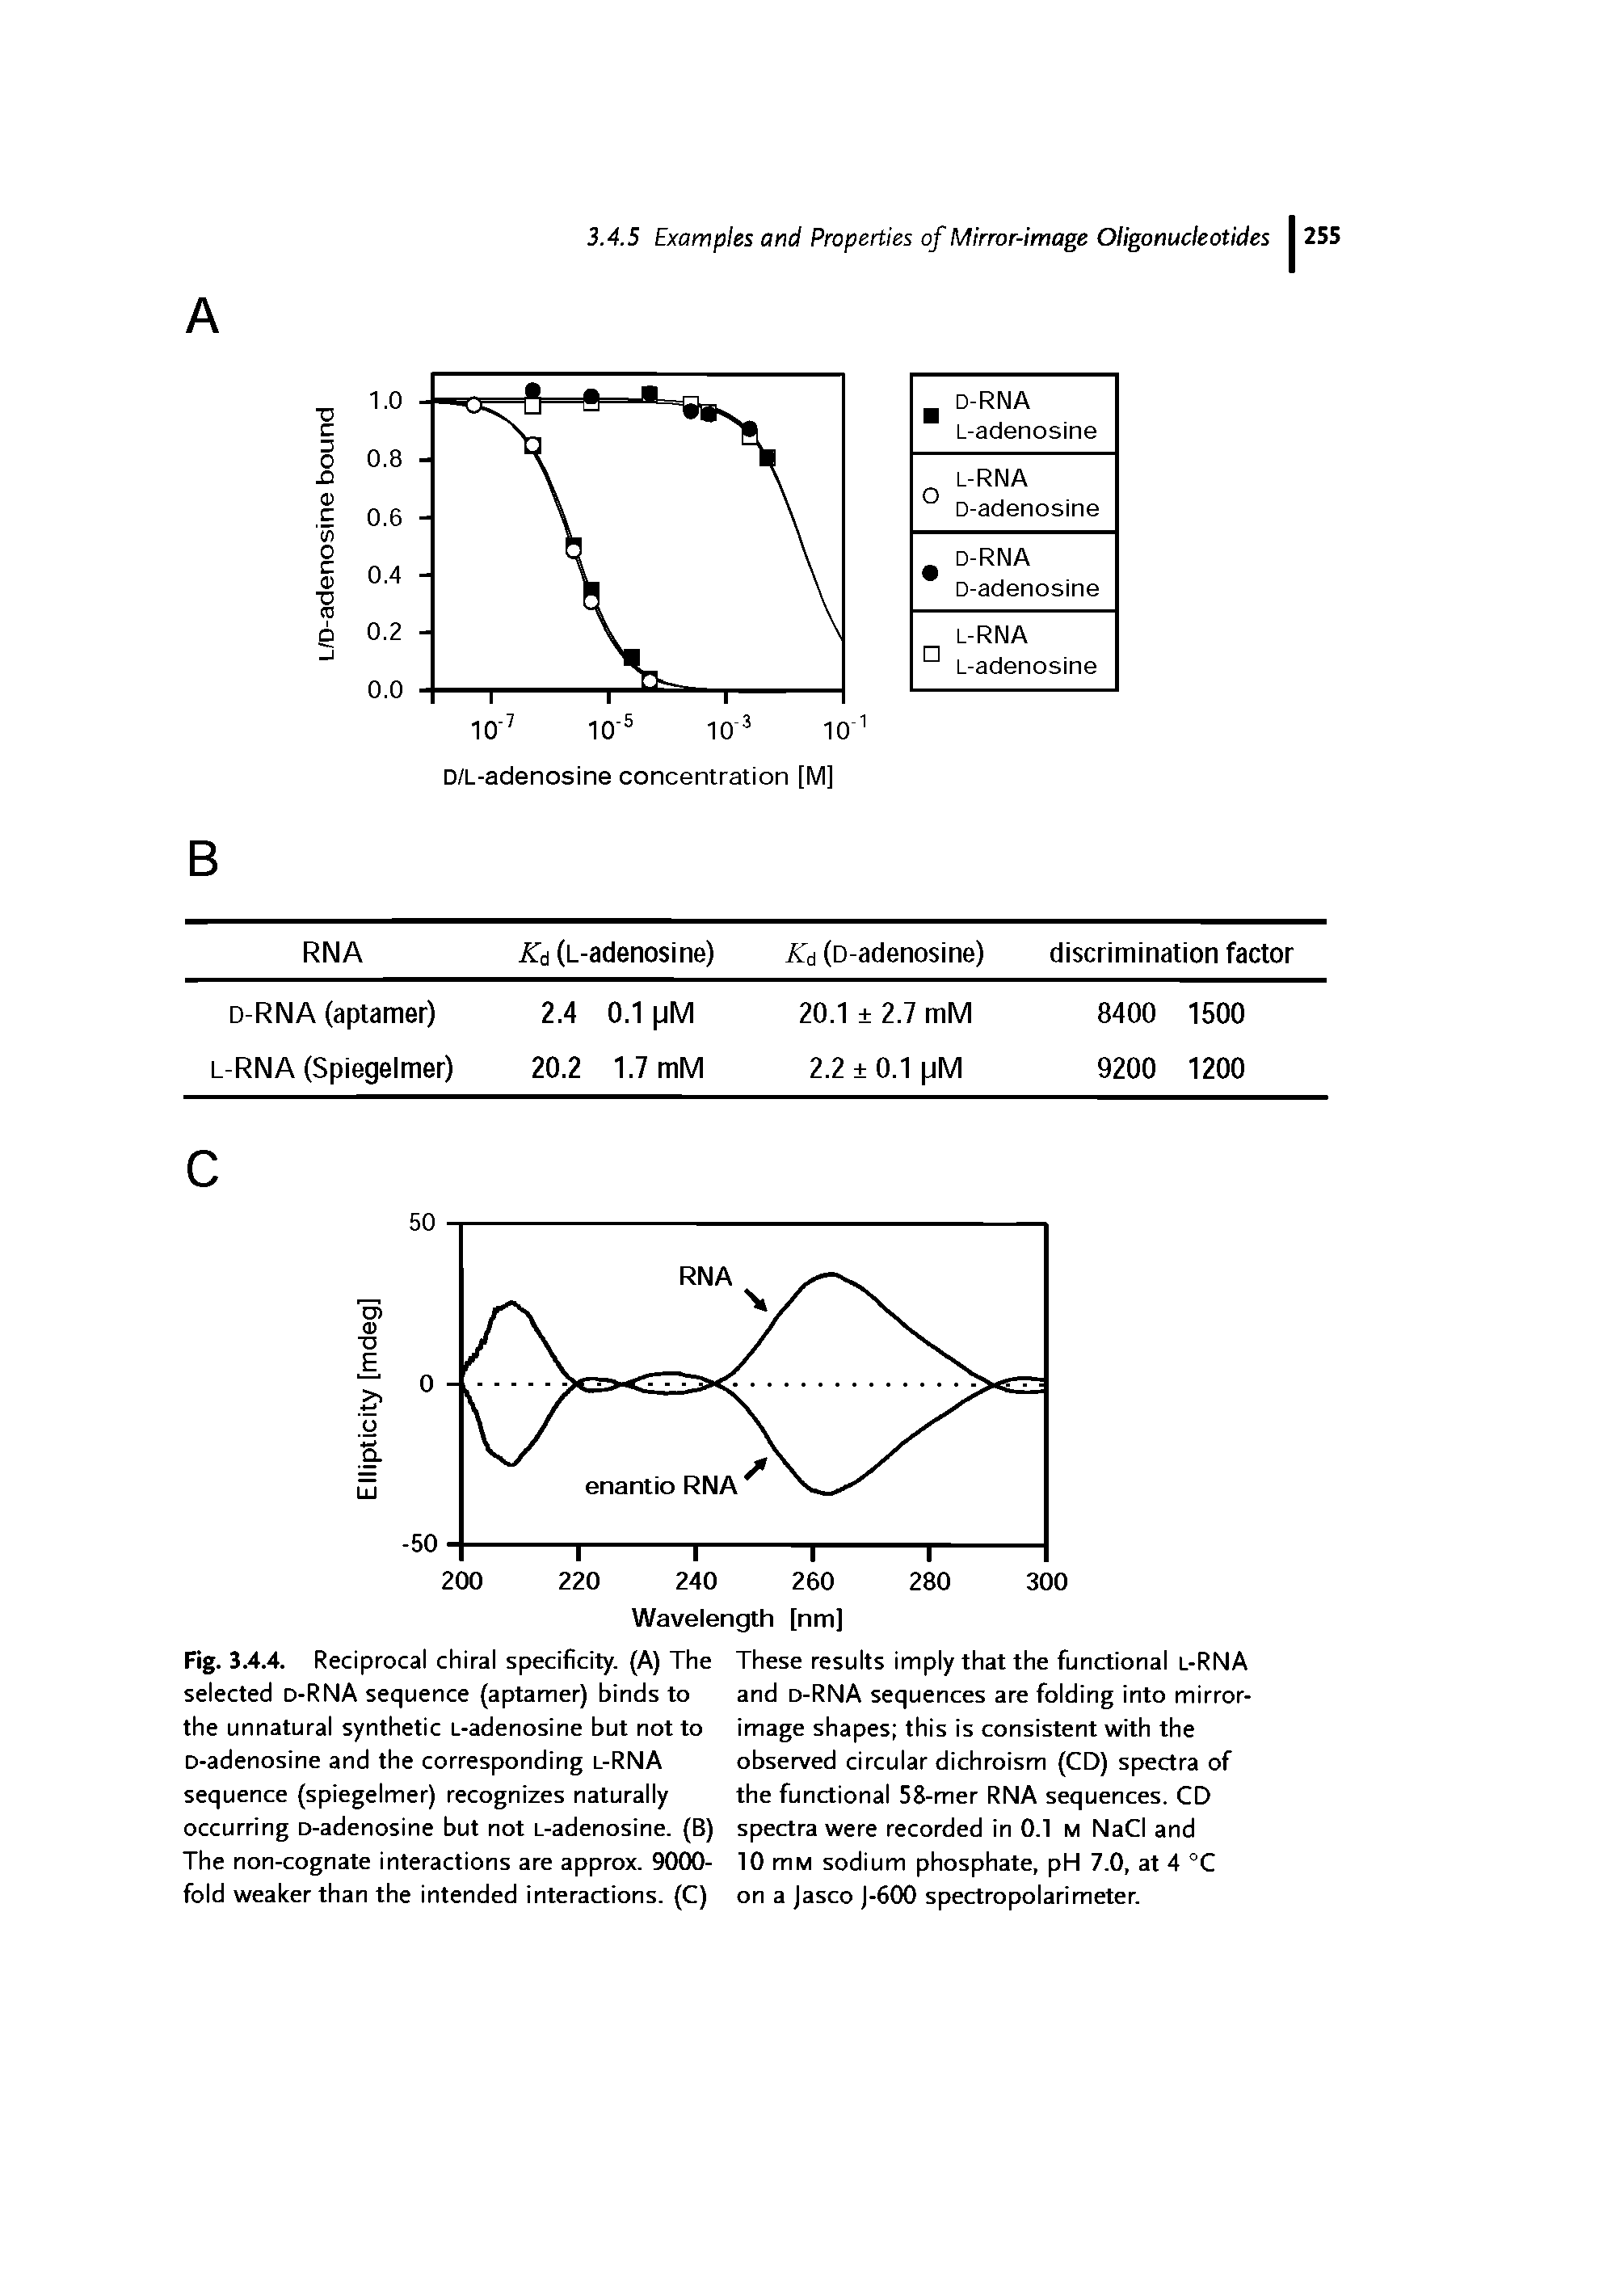 Fig. 3.4.4. Reciprocal chiral specificity. (A) The selected d-RNA sequence (aptamer) binds to the unnatural synthetic L-adenosine but not to D-adenosine and the corresponding l-RNA sequence (spiegelmer) recognizes naturally occurring D-adenosine but not L-adenosine. (B) The non-cognate interactions are approx. 9000-fold weaker than the intended interactions. (C)...